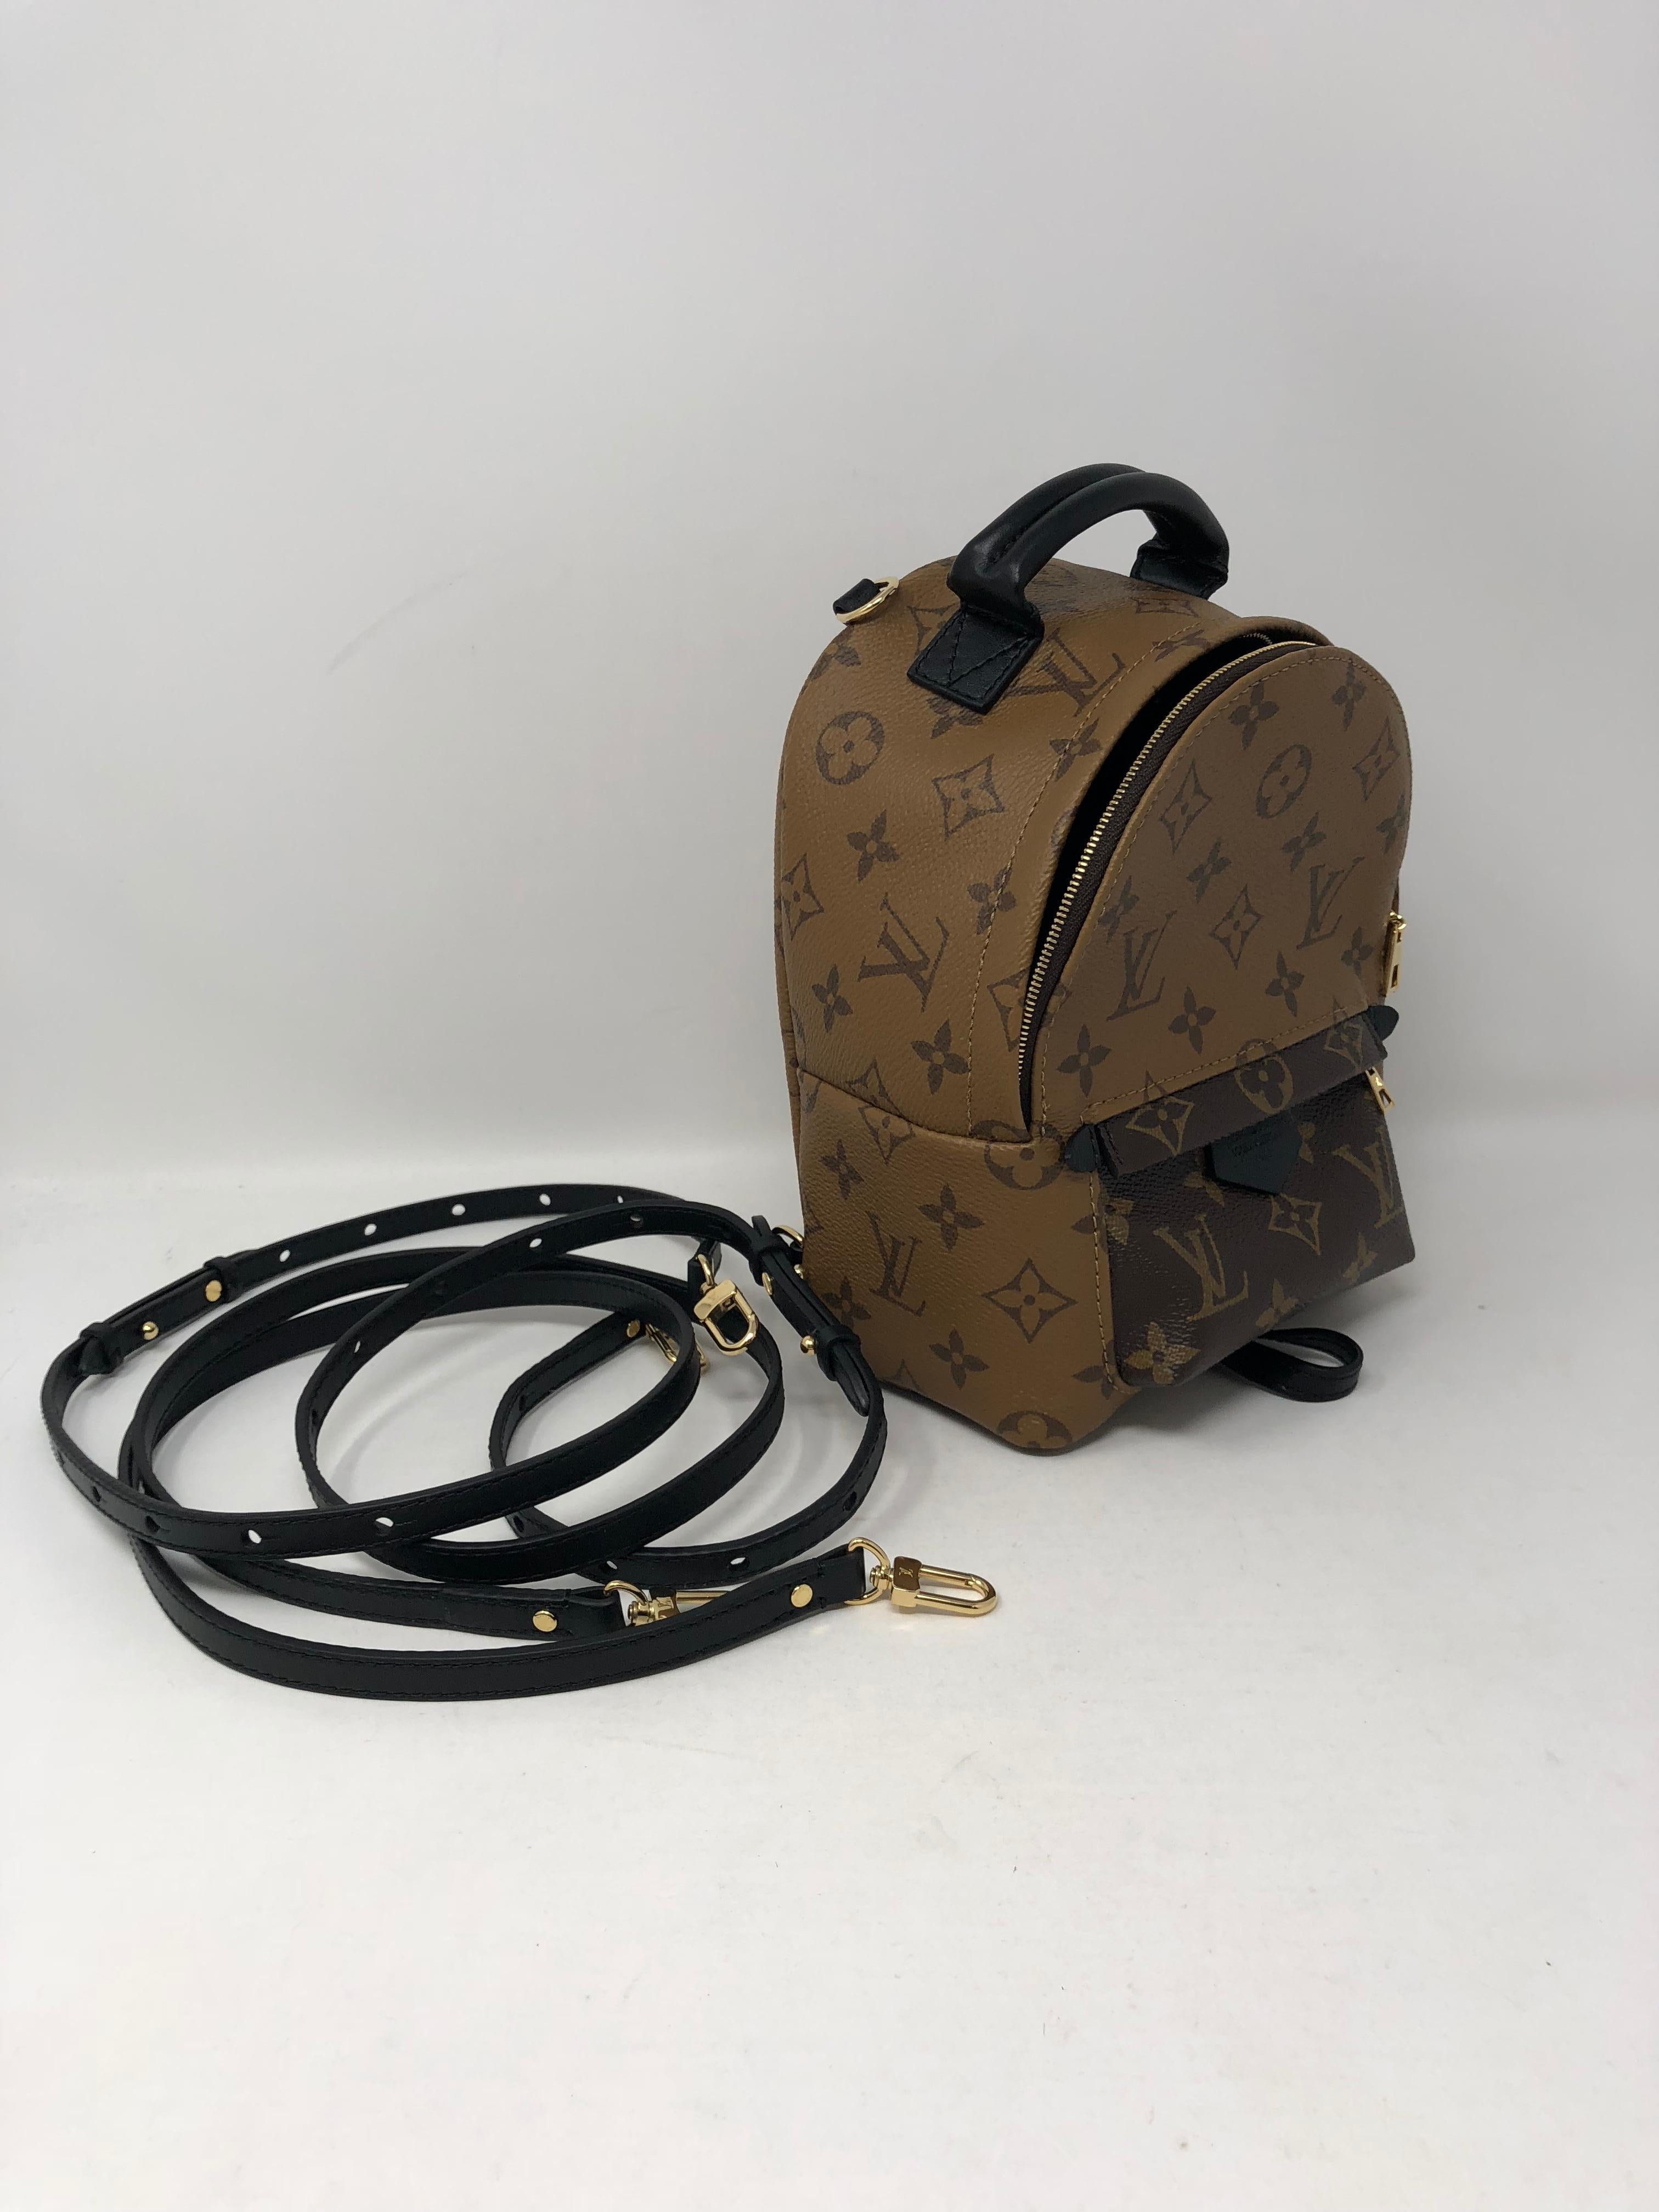 Louis Vuitton Palm Springs Reverse Mini Black Brown Canvas Backpack. Cute mini size backpack that can be worn crossbody, as a fanny pack, or as a backpack. Rare and limited. Brand new condition, never worn. Comes with the complete set. Guaranteed